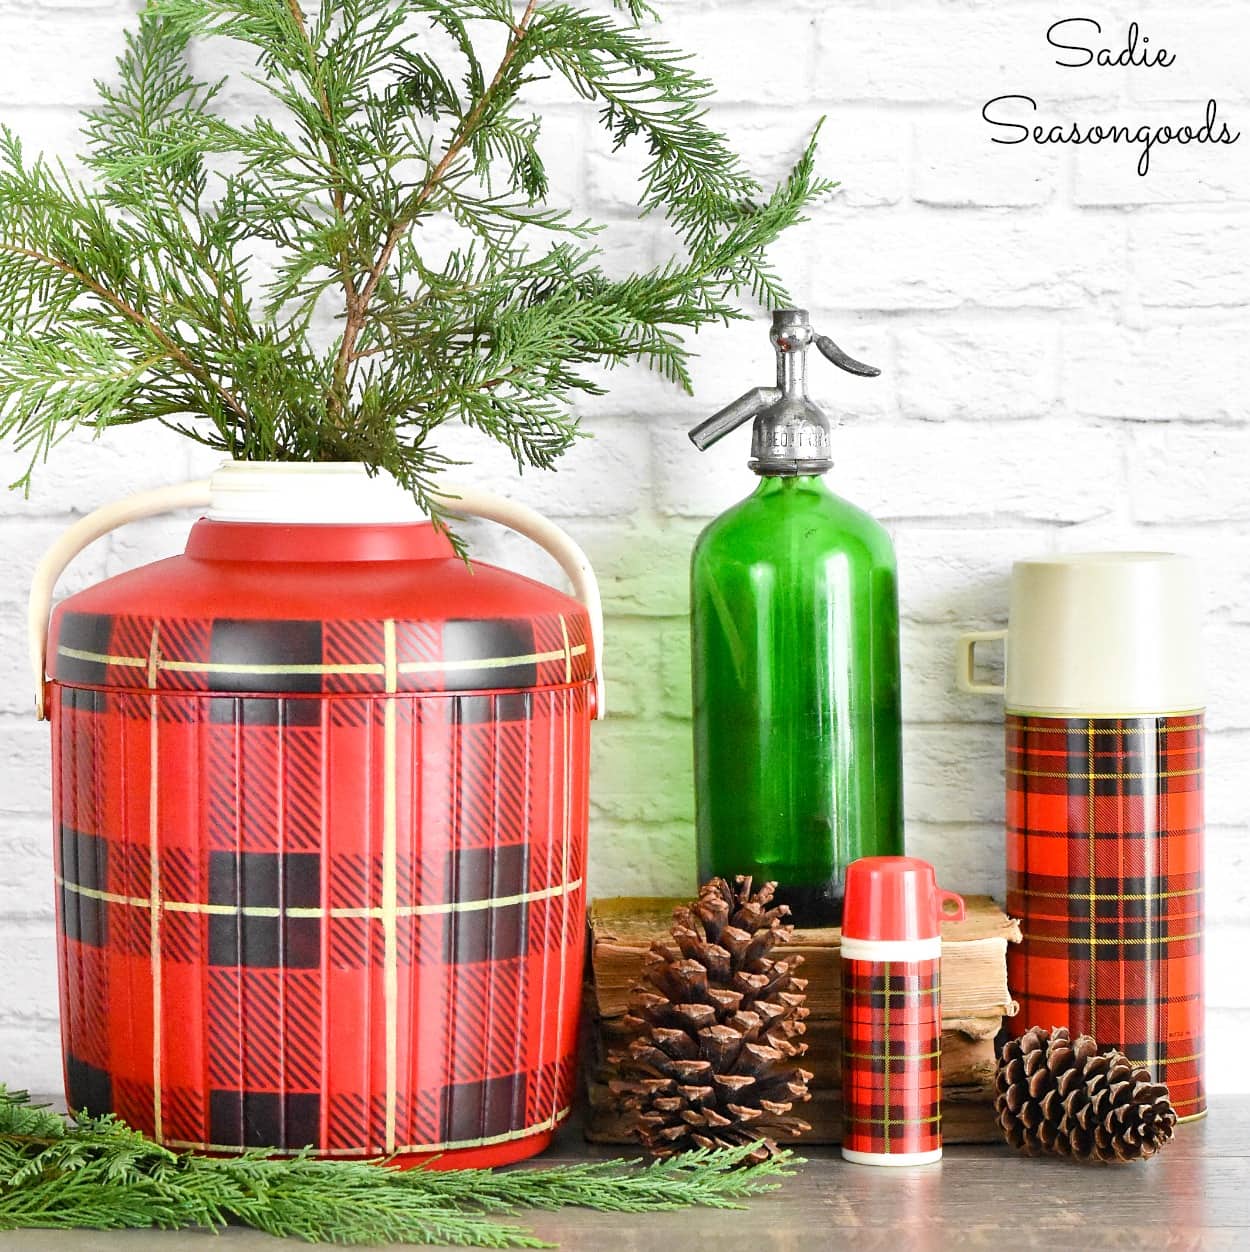 Plaid Christmas Decor with a Thermos Cooler